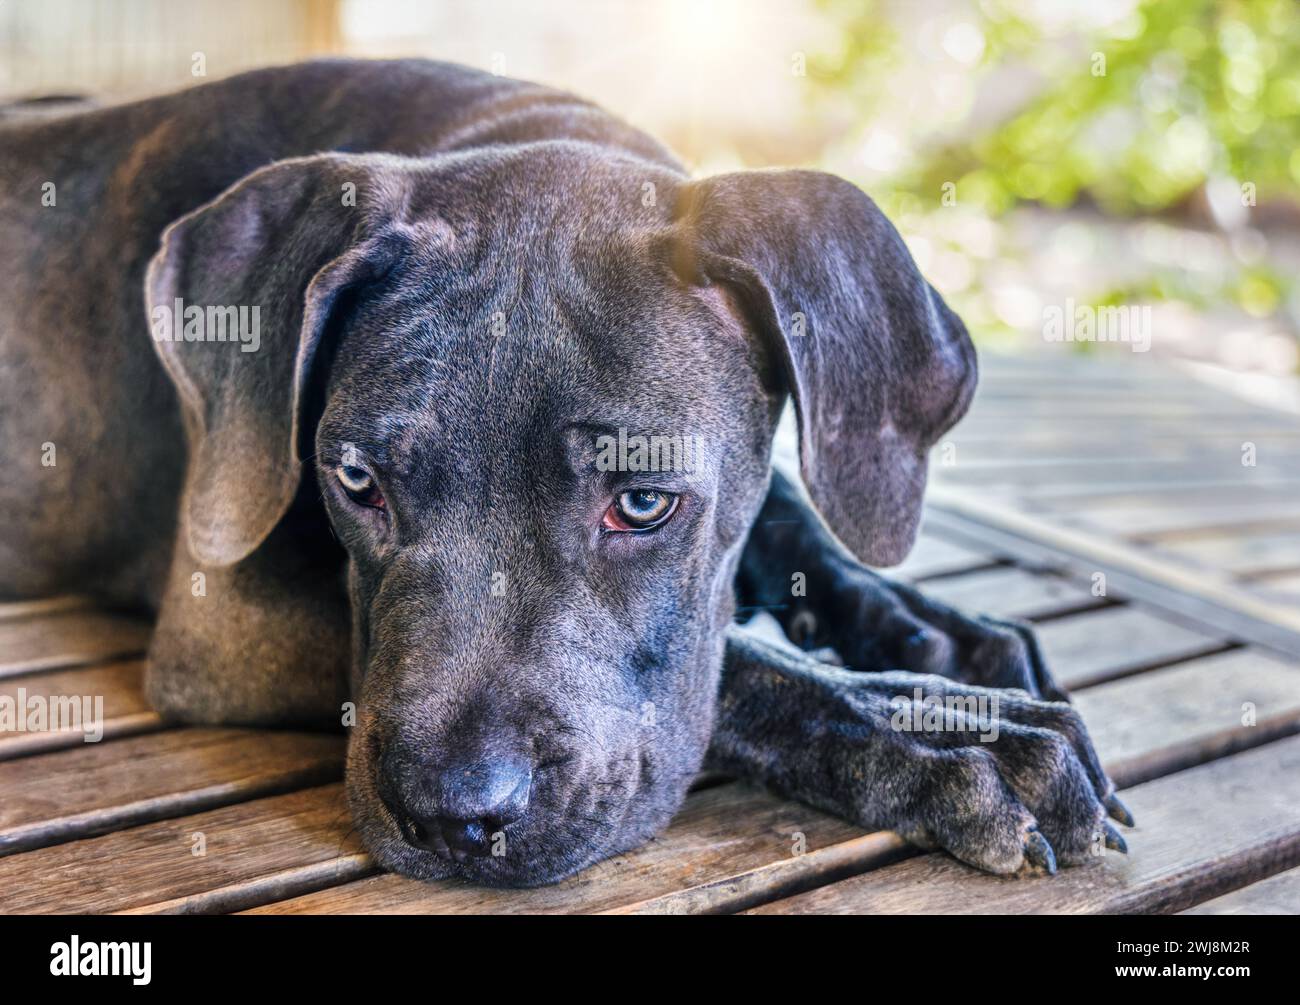 Black Boerboel puppy on the porch outdoors in the back garden at sunset. Boerboel is a South African breed of large dog of mastiff type, used as a fam Stock Photo